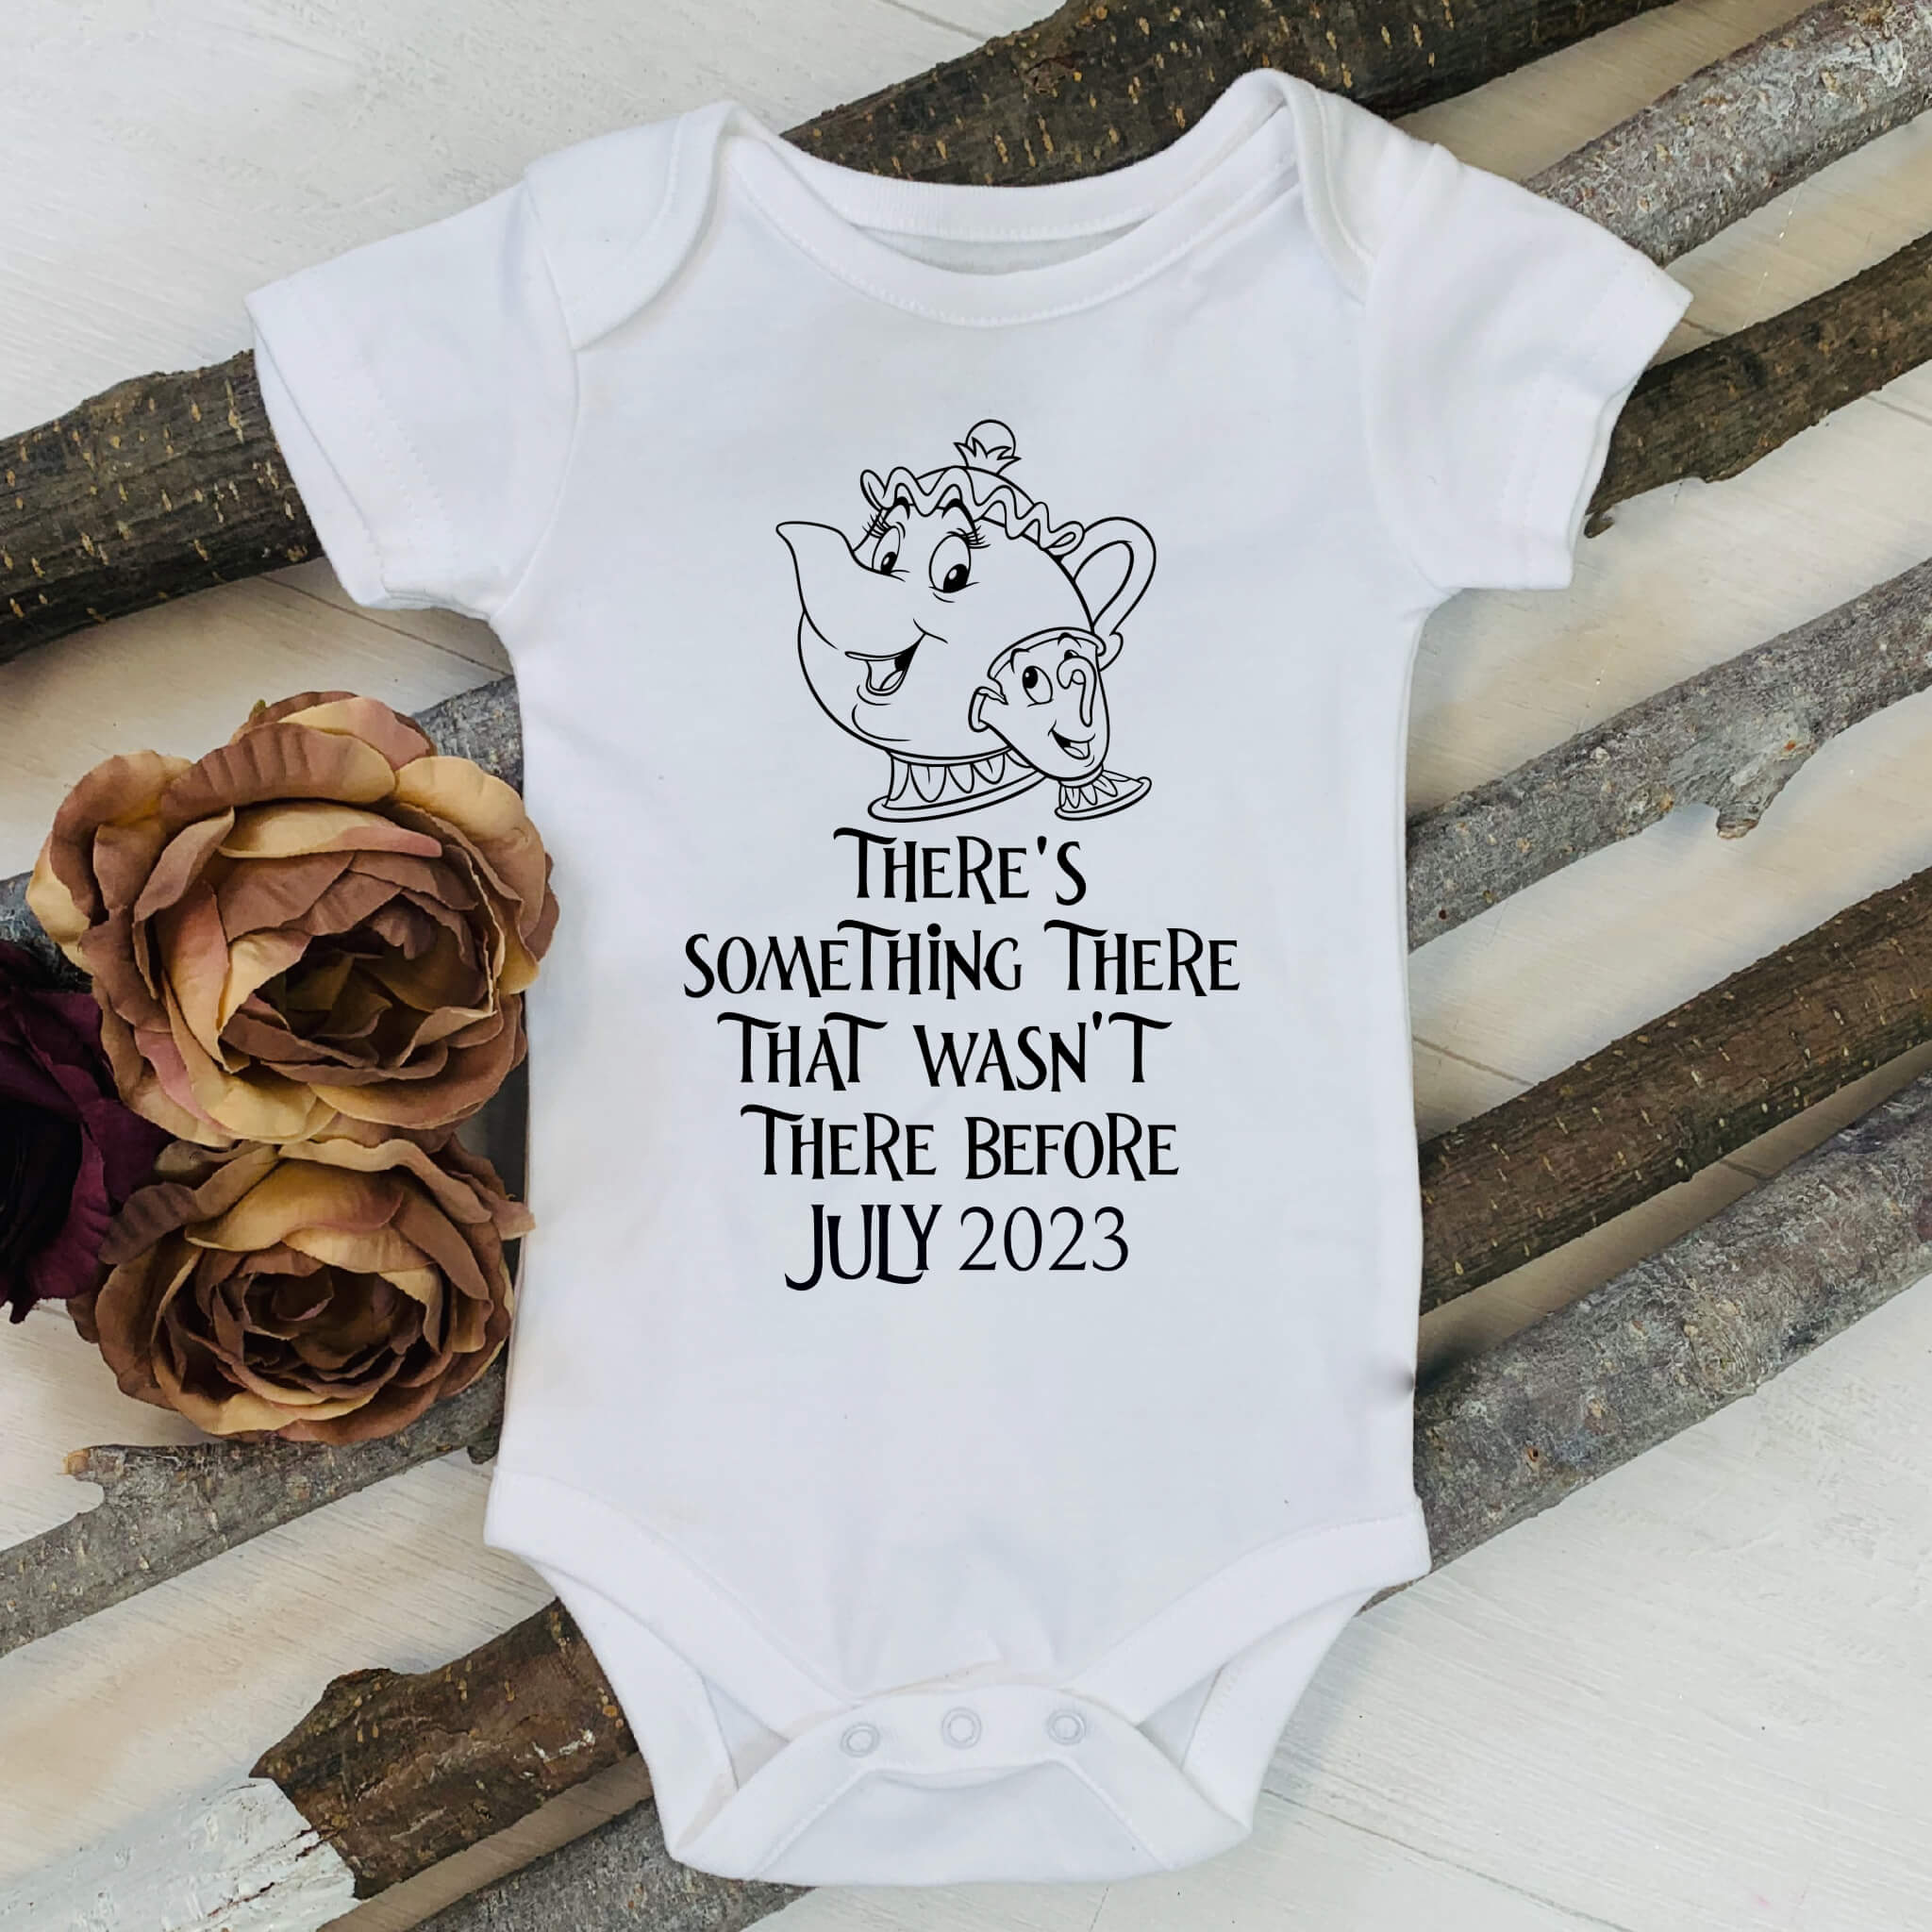 Personalized Pregnancy Announcement, There’s Something There That Wasn’t There Before, Dad, Grandma, Grandpa, Aunt, Uncle To Be, Tale as Old as Time, Customized Baby Announcement Onesie, Animated Movie Characters Pregnancy Announcement